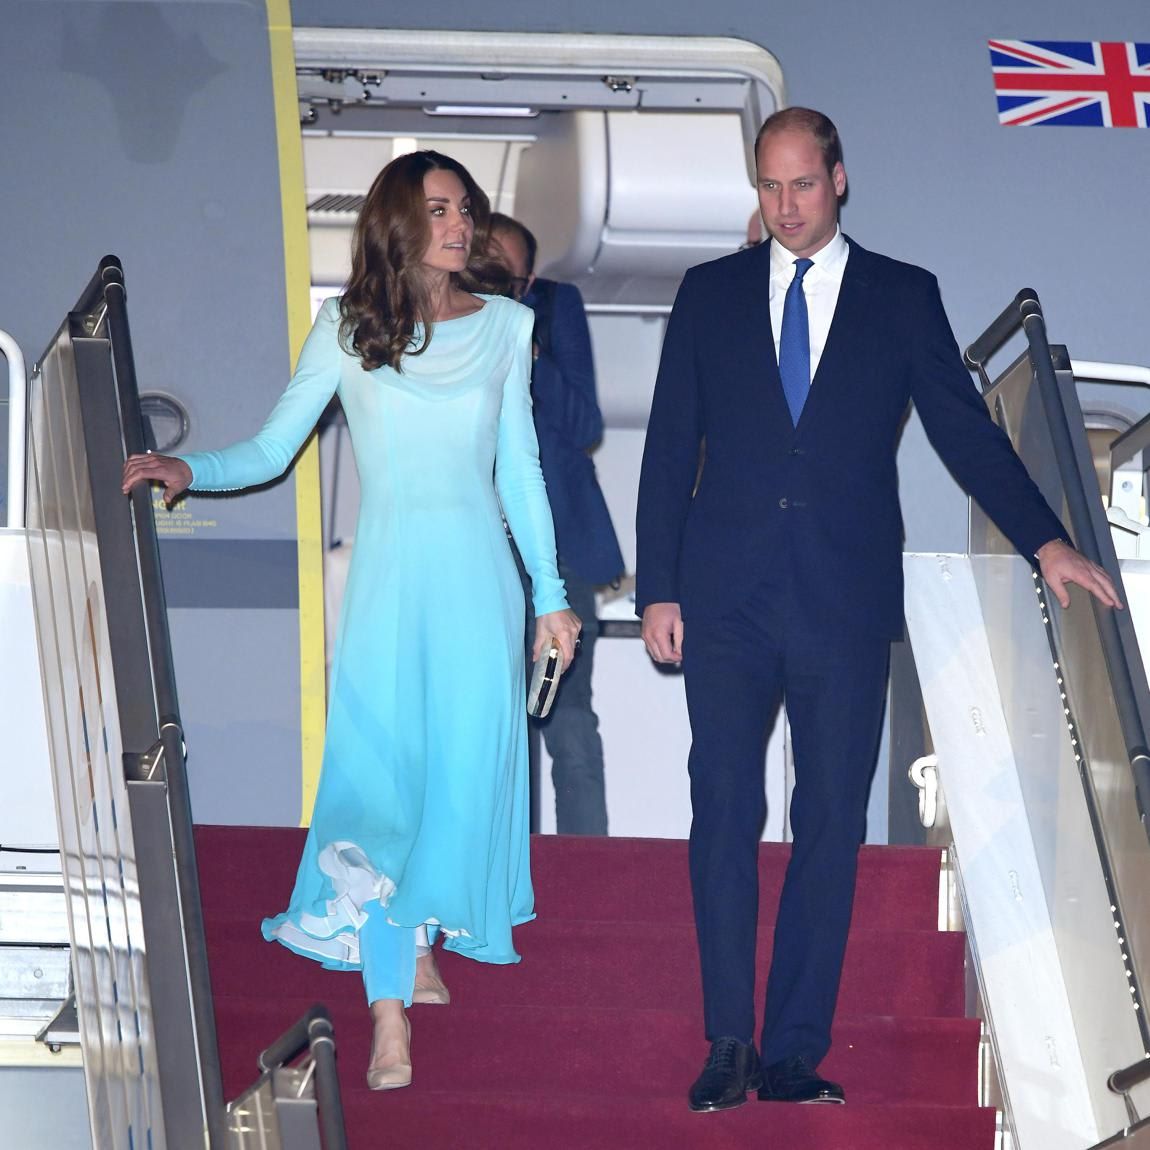 Kate Middleton and Prince William arrive in Pakistan